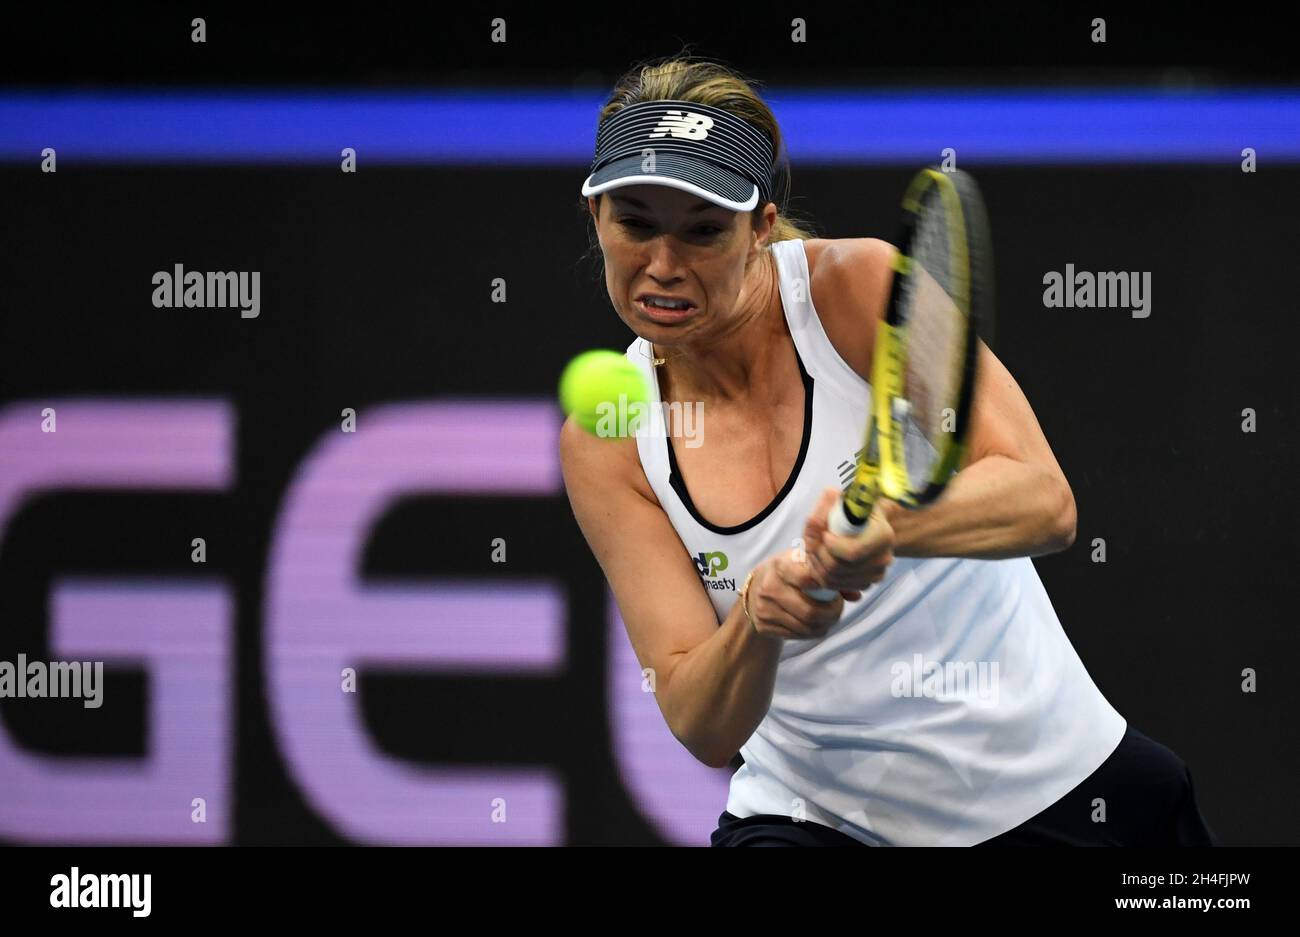 Prague, Czech Republic. 02nd Nov, 2021. Danielle Collins of USA in action  during Group C match of the women's tennis Billie Jean King Cup (former Fed  Cup) against Karolina Schmiedlova of Slovakia